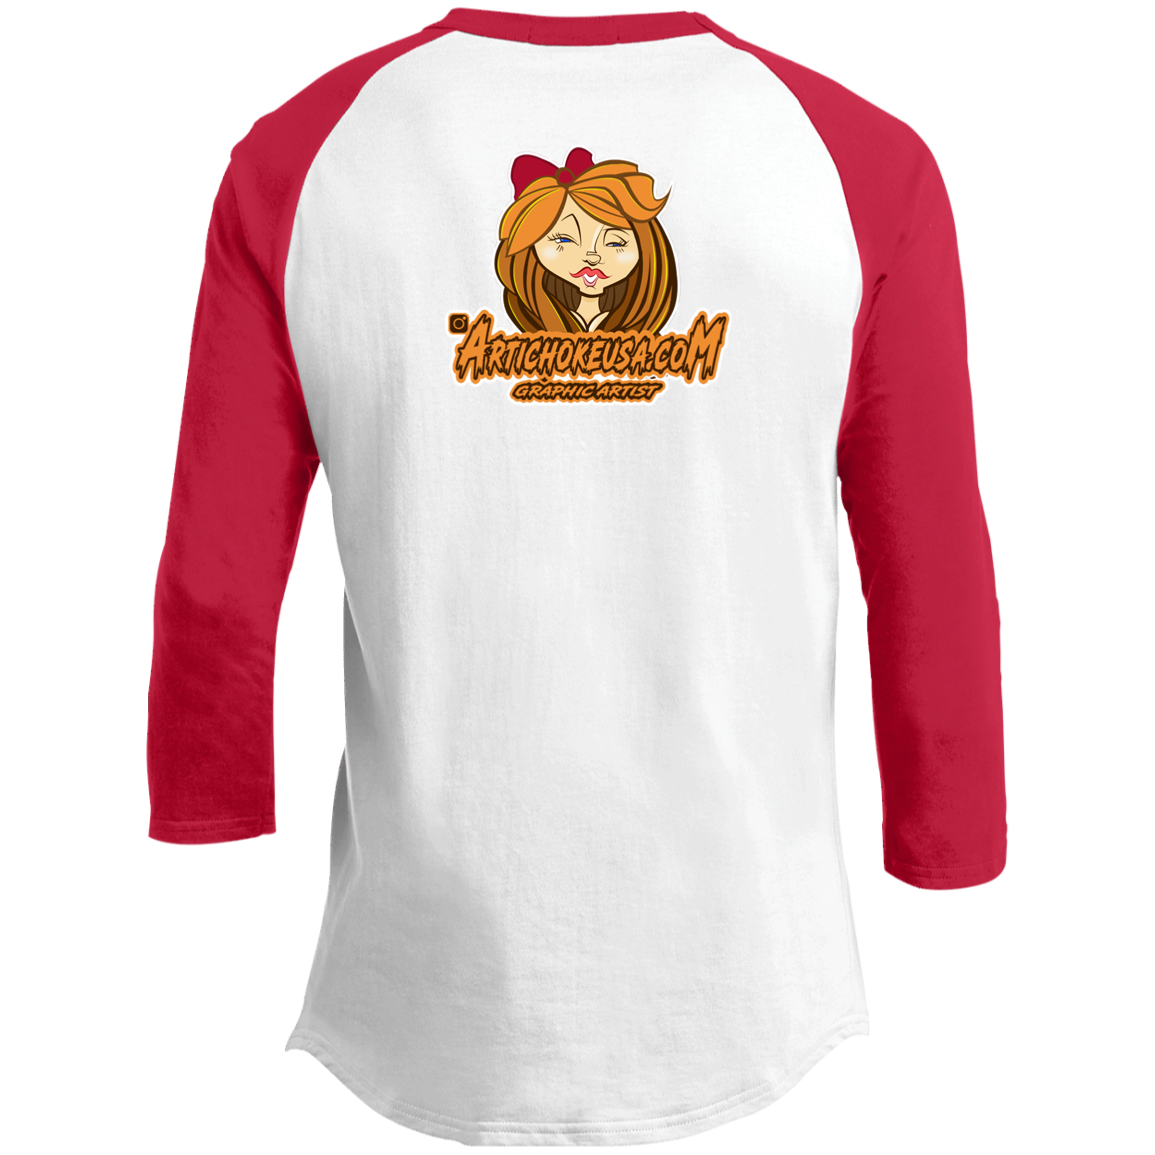 ZZ#21 Characters and Fonts. Aubrey. A show case of my characters and font styles. 3/4 Raglan Sleeve Shirt